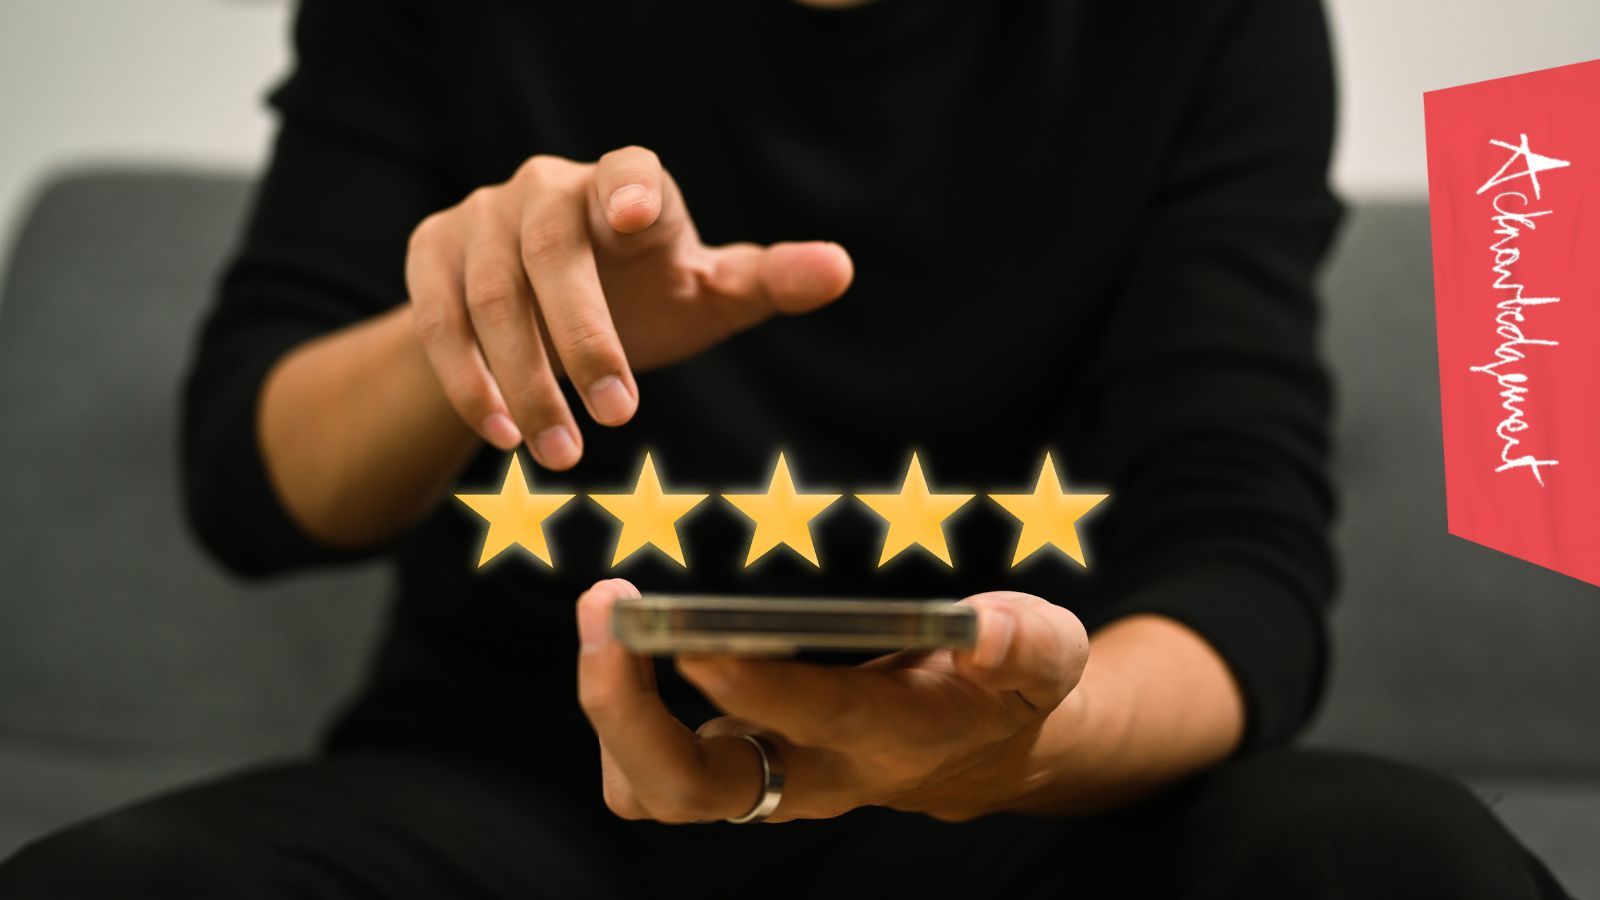 Are online reviews still trusted by consumers?